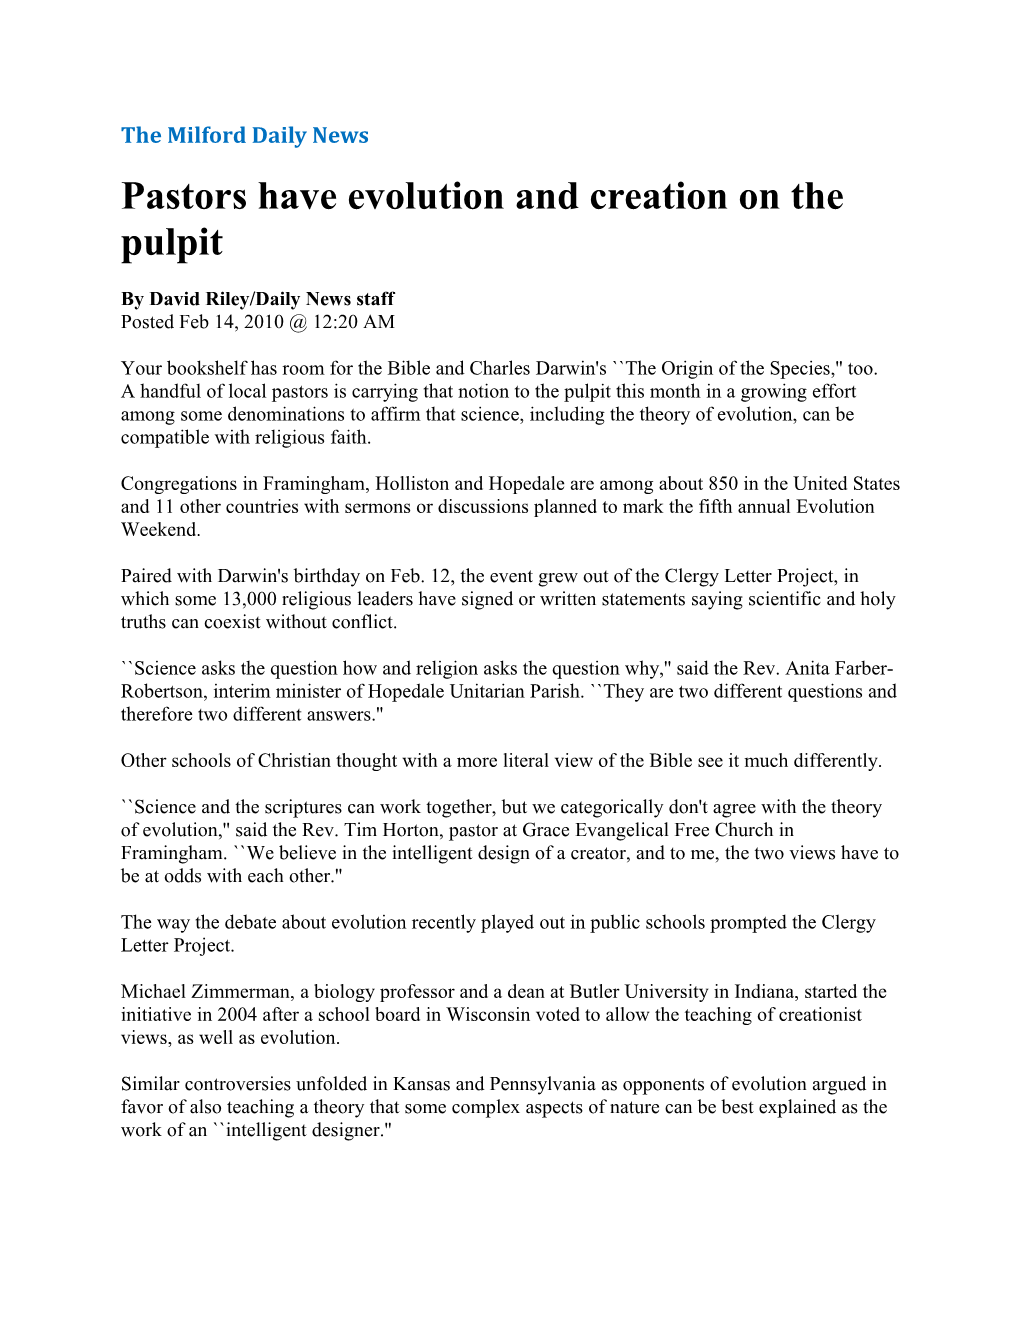 Pastors Have Evolution and Creation on the Pulpit